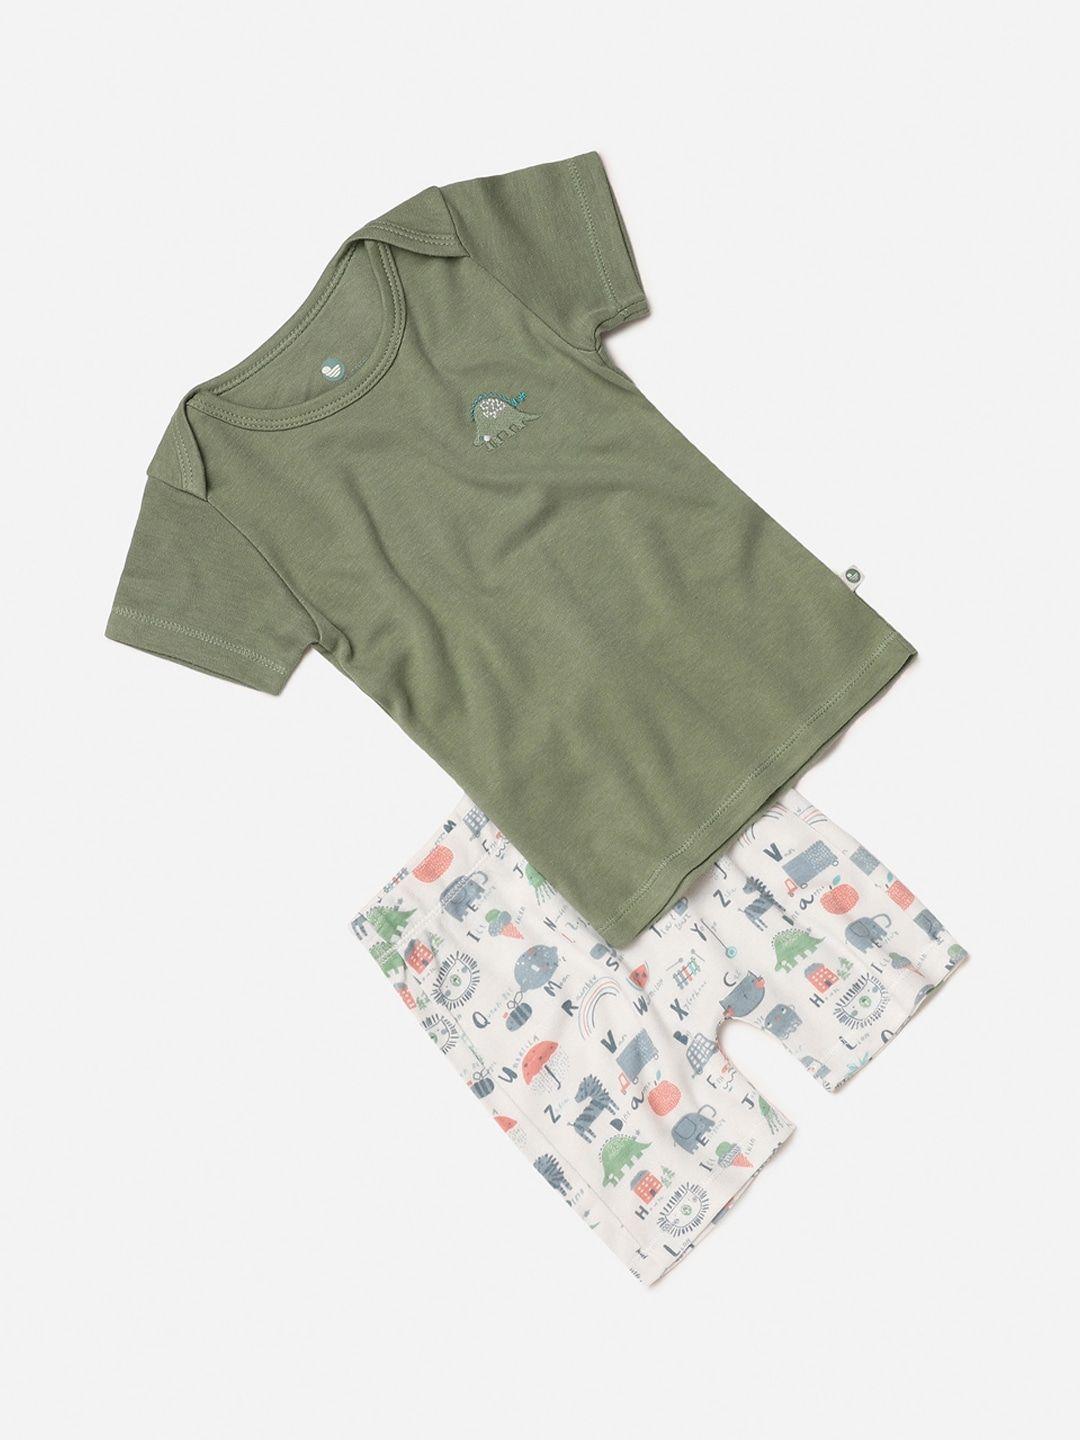 cocoon care kids olive green & white printed bamboo t-shirt with shorts